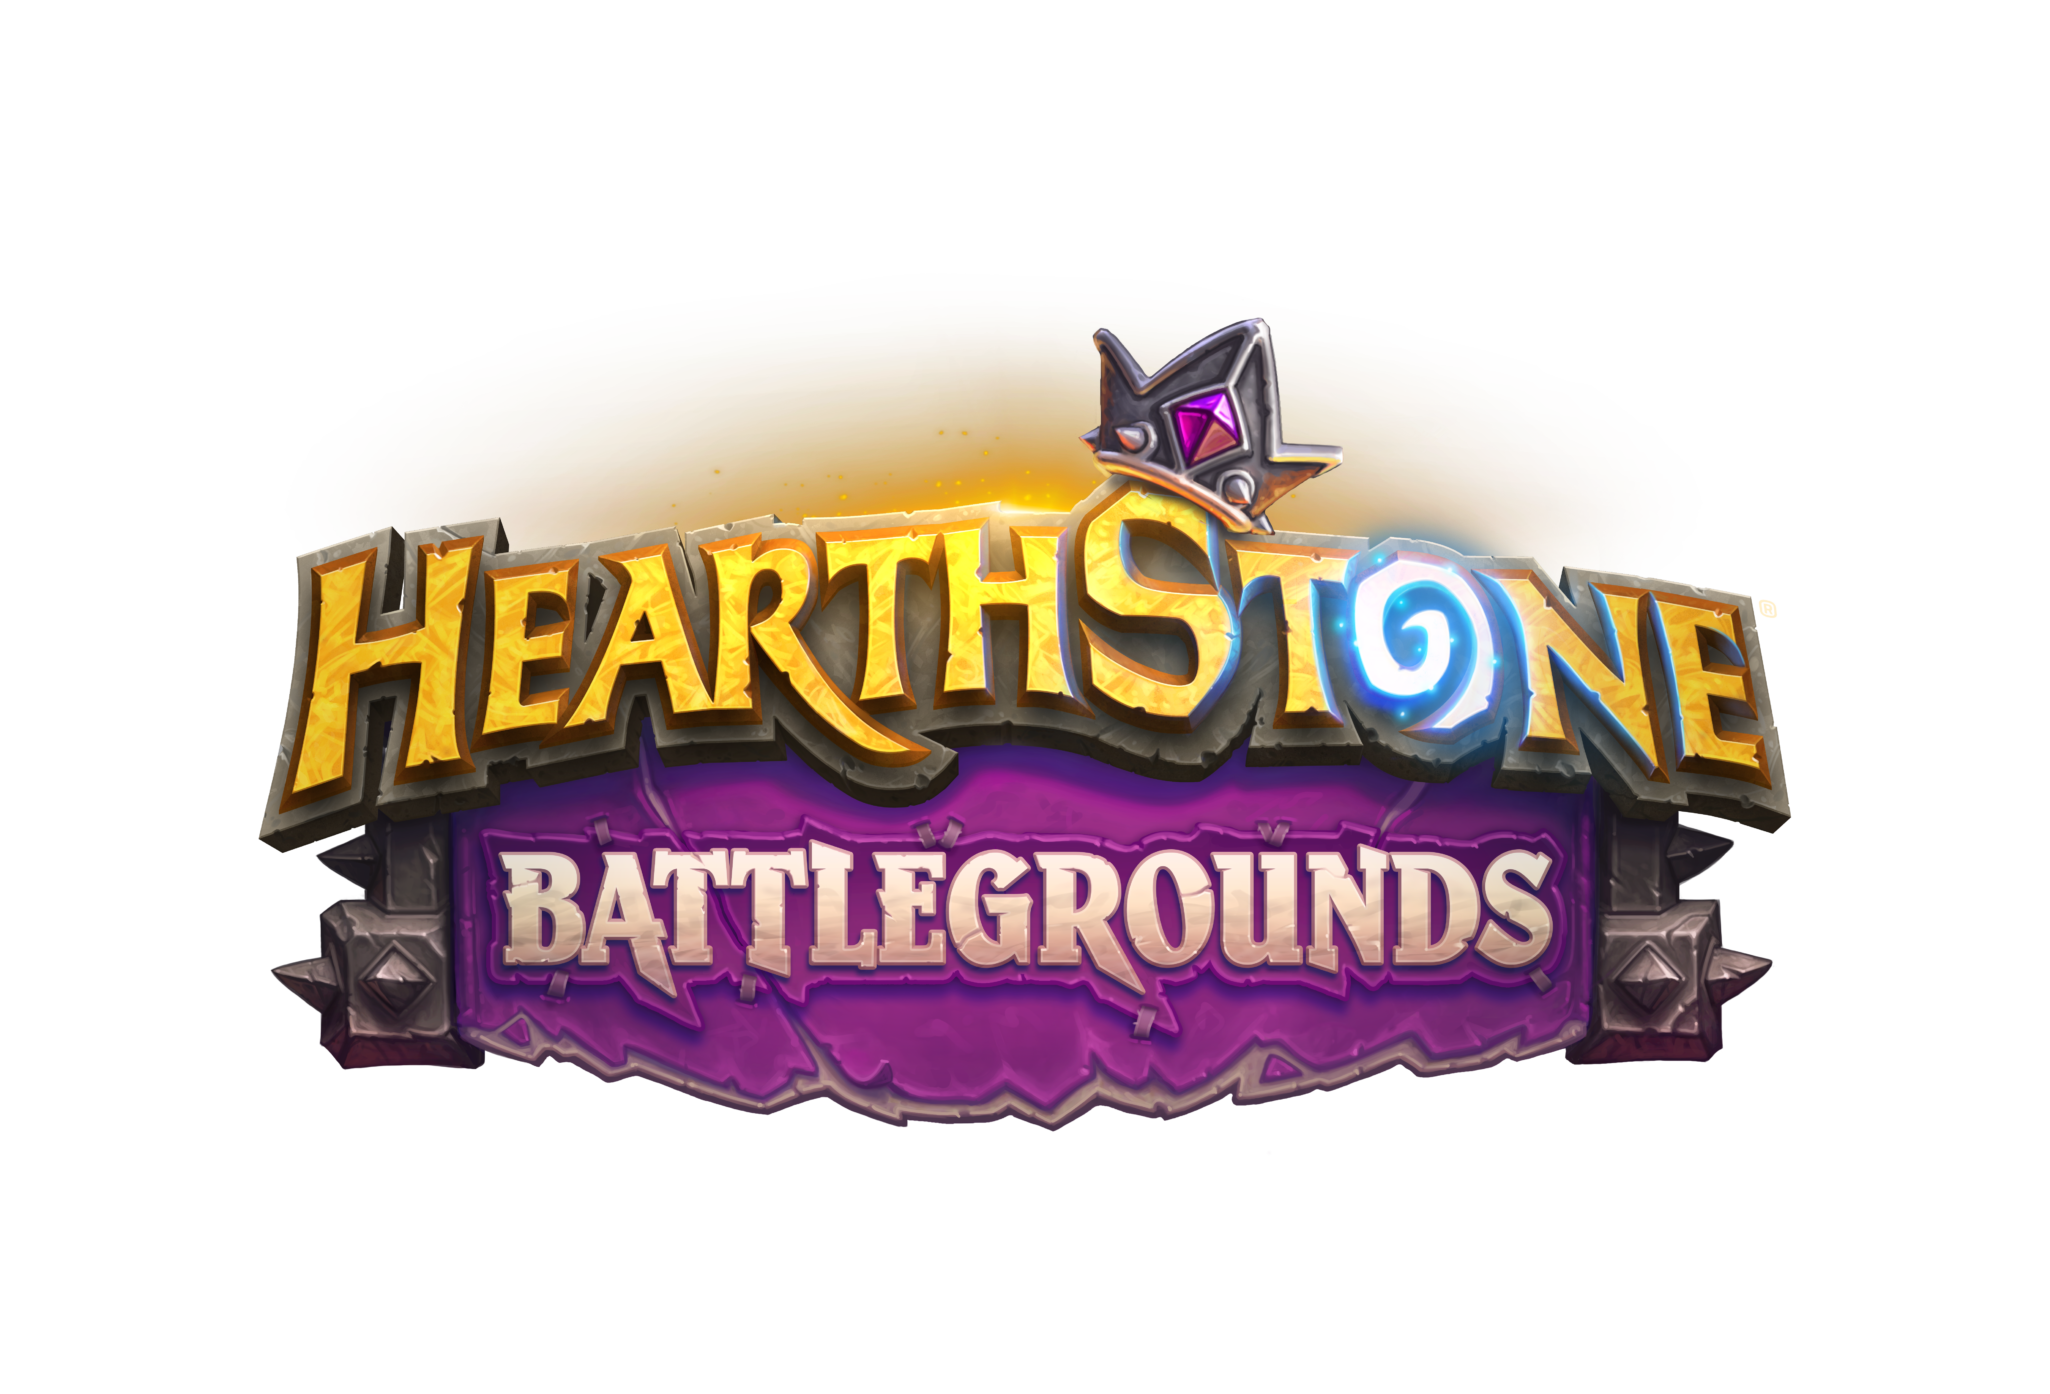 Hearthstone Battlegrounds guide, tips, tricks, and cheats